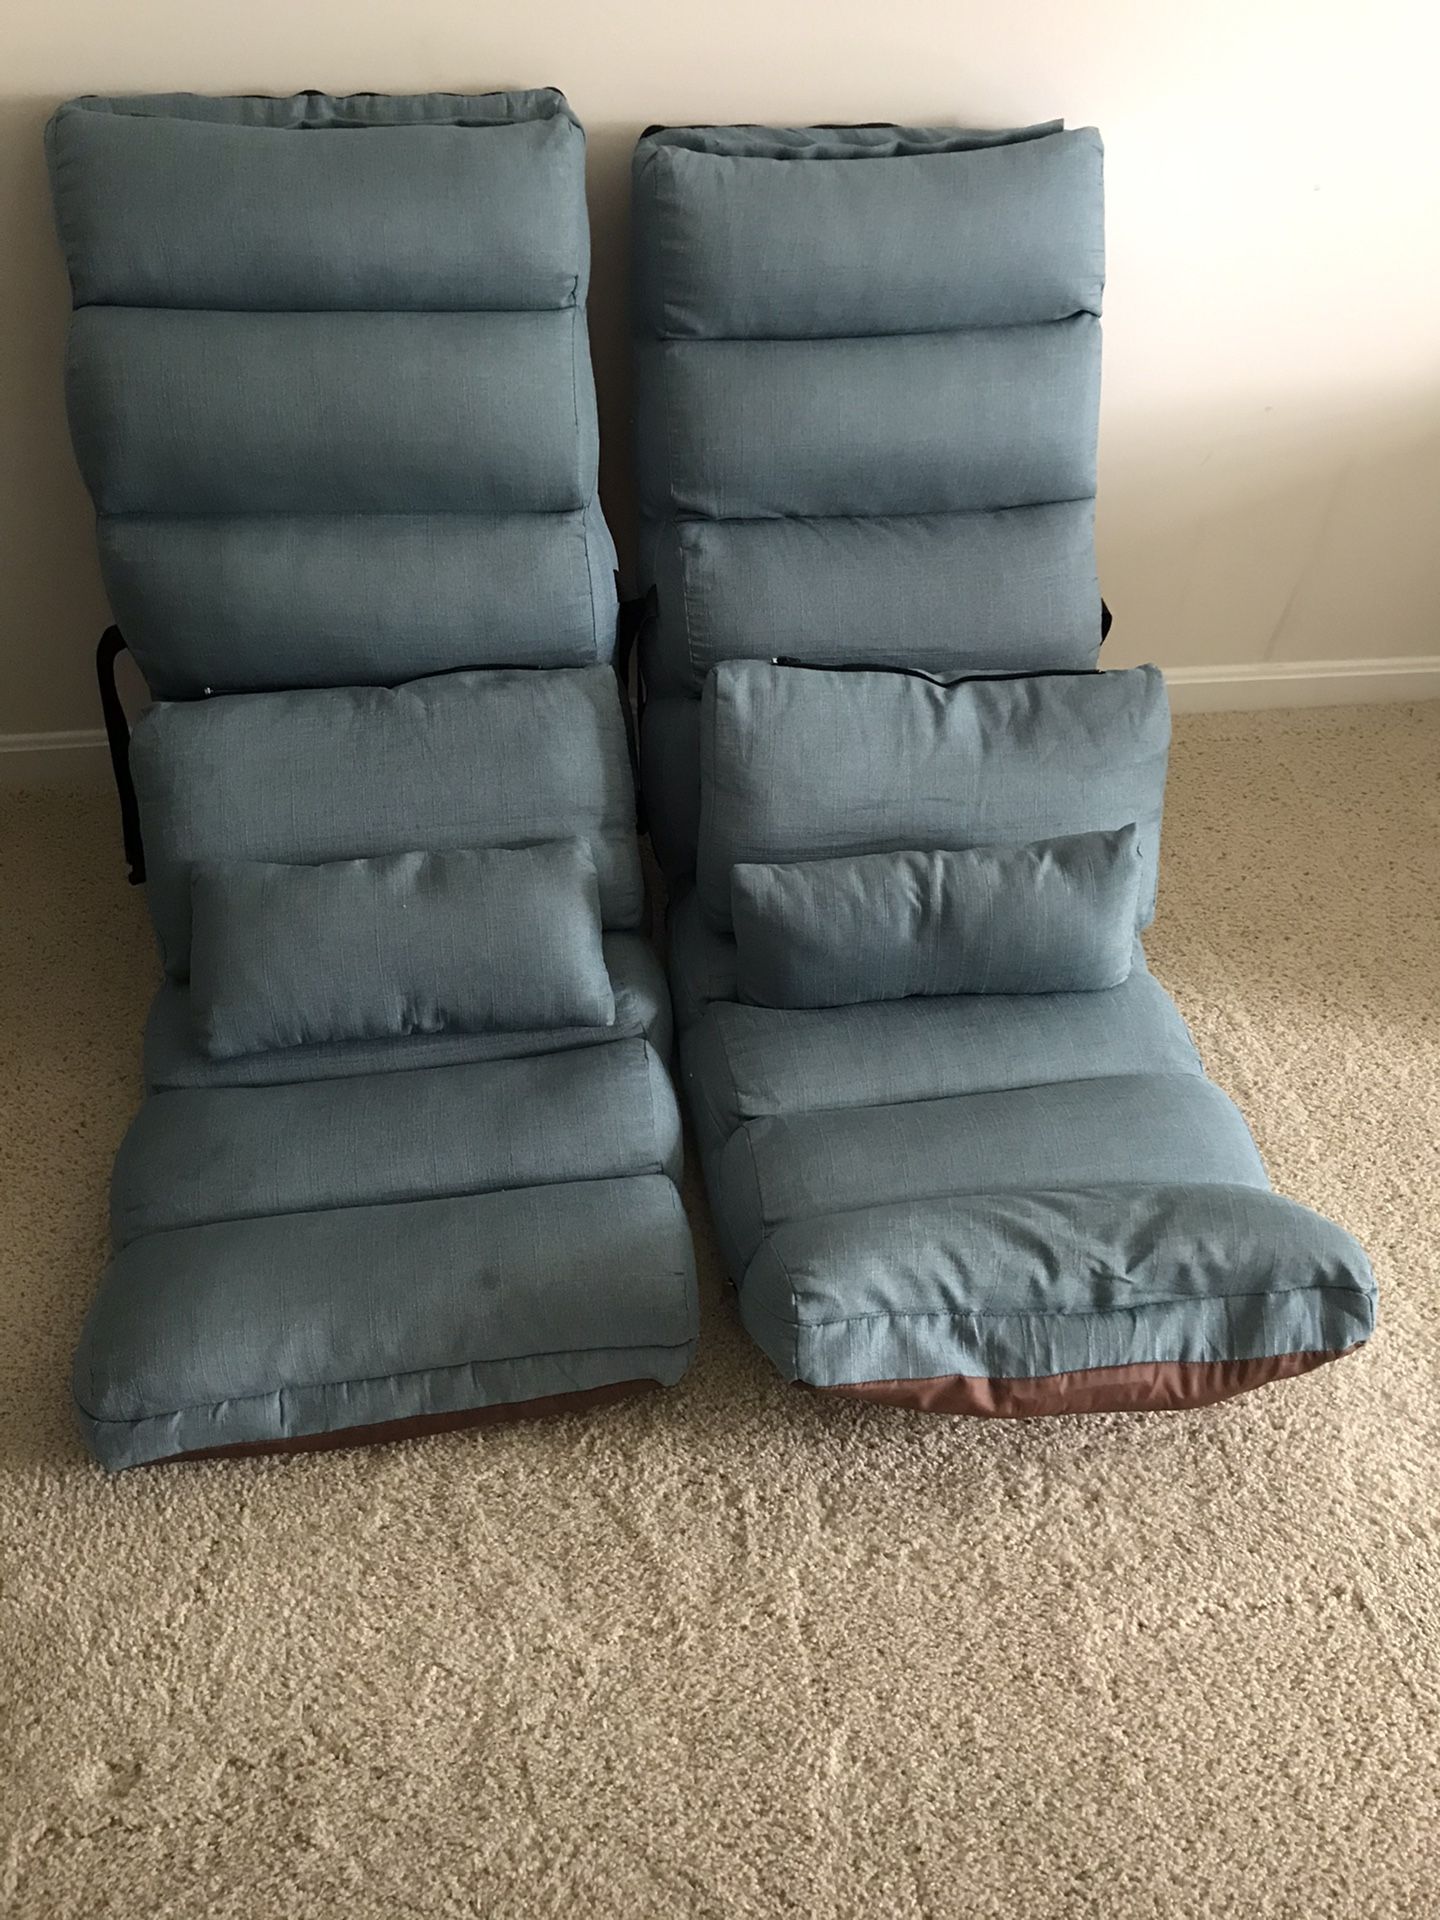 Recently Purchased! Blue Reclining Floor Chairs! (Set of 2)